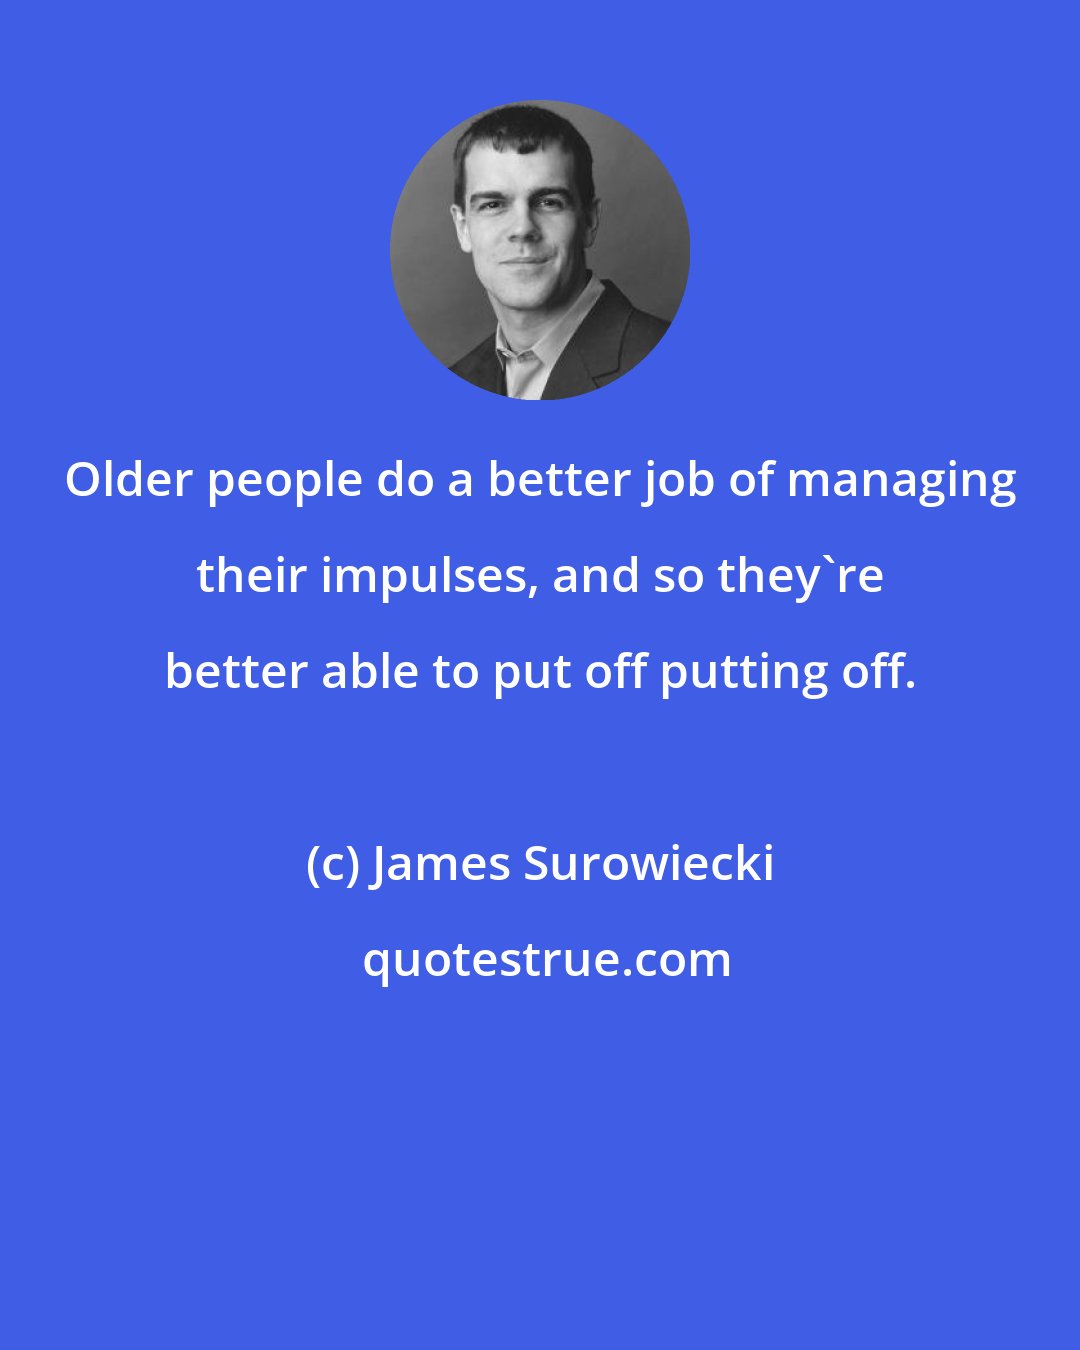 James Surowiecki: Older people do a better job of managing their impulses, and so they're better able to put off putting off.